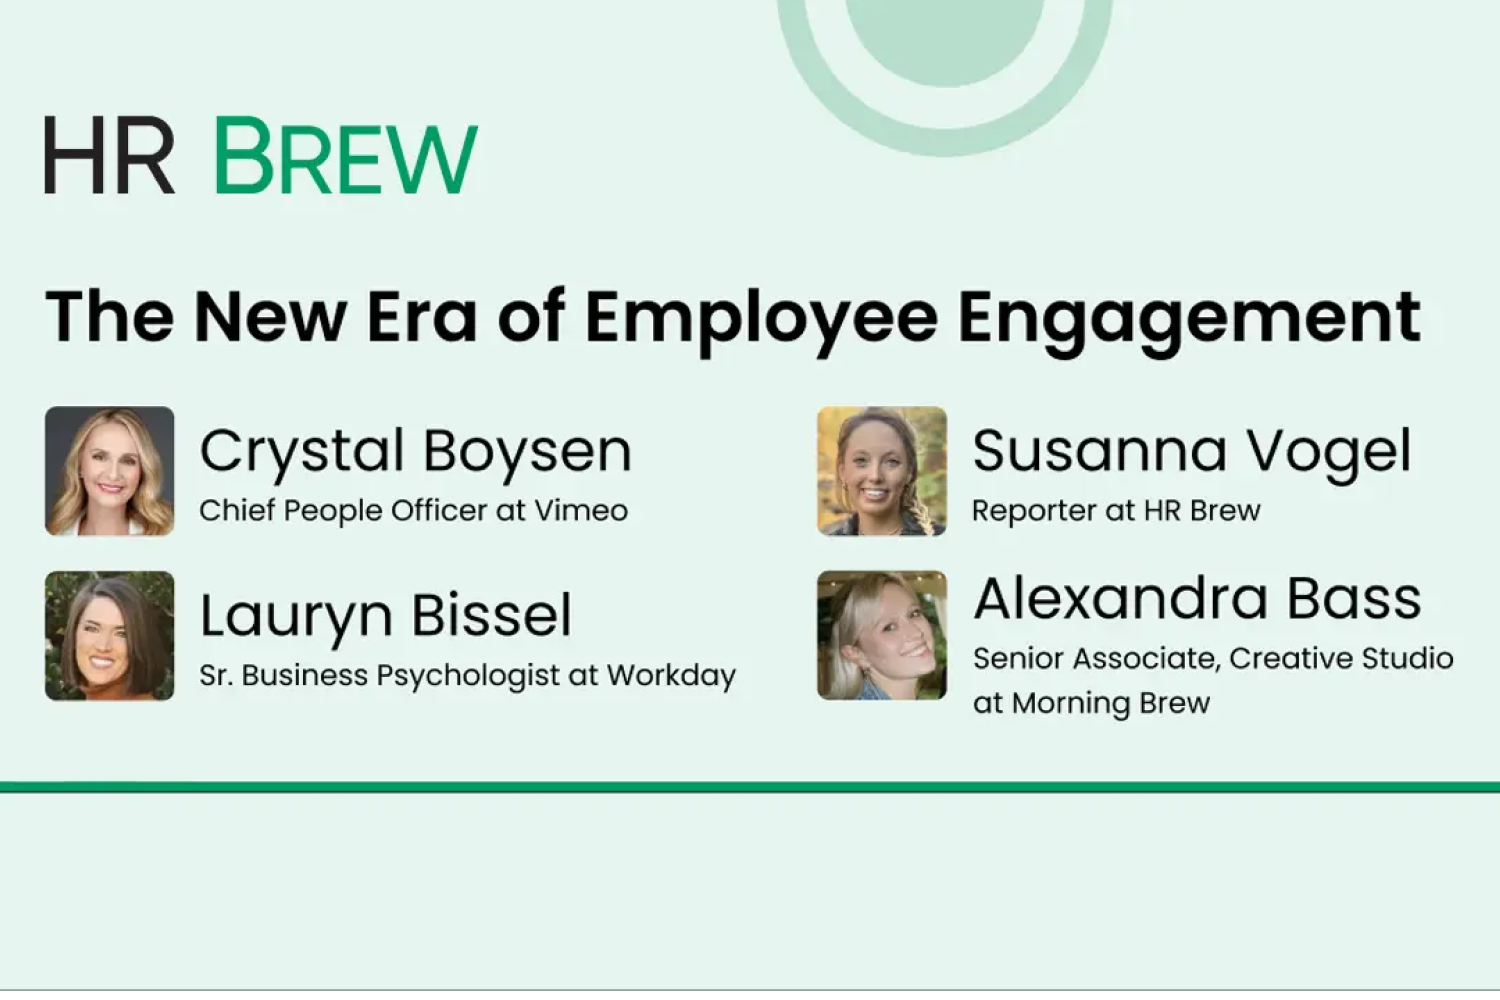 The New Era of Employee Engagement a virtual event by HR Brew